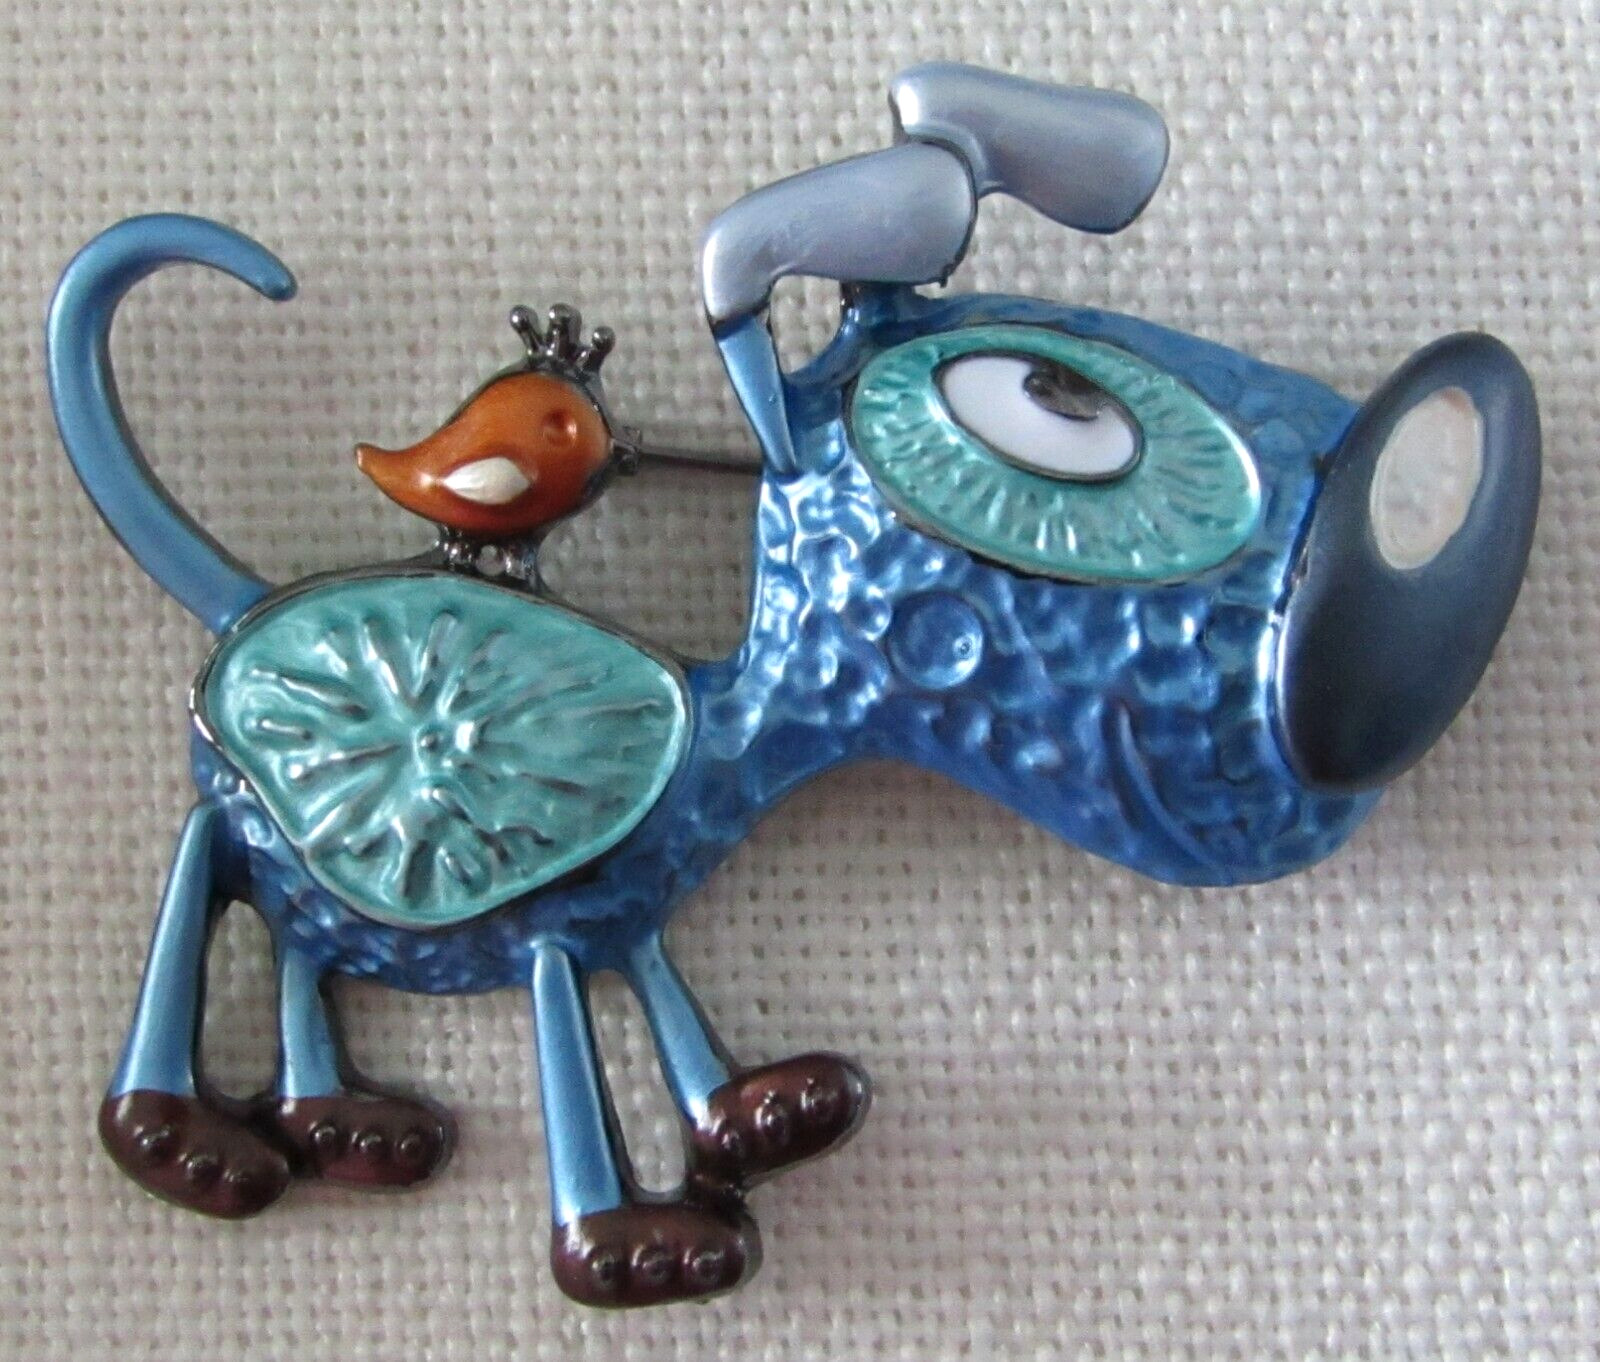 Dog Brooch Pin Blue with Bird Multi-Colored Features Enamel on Metal